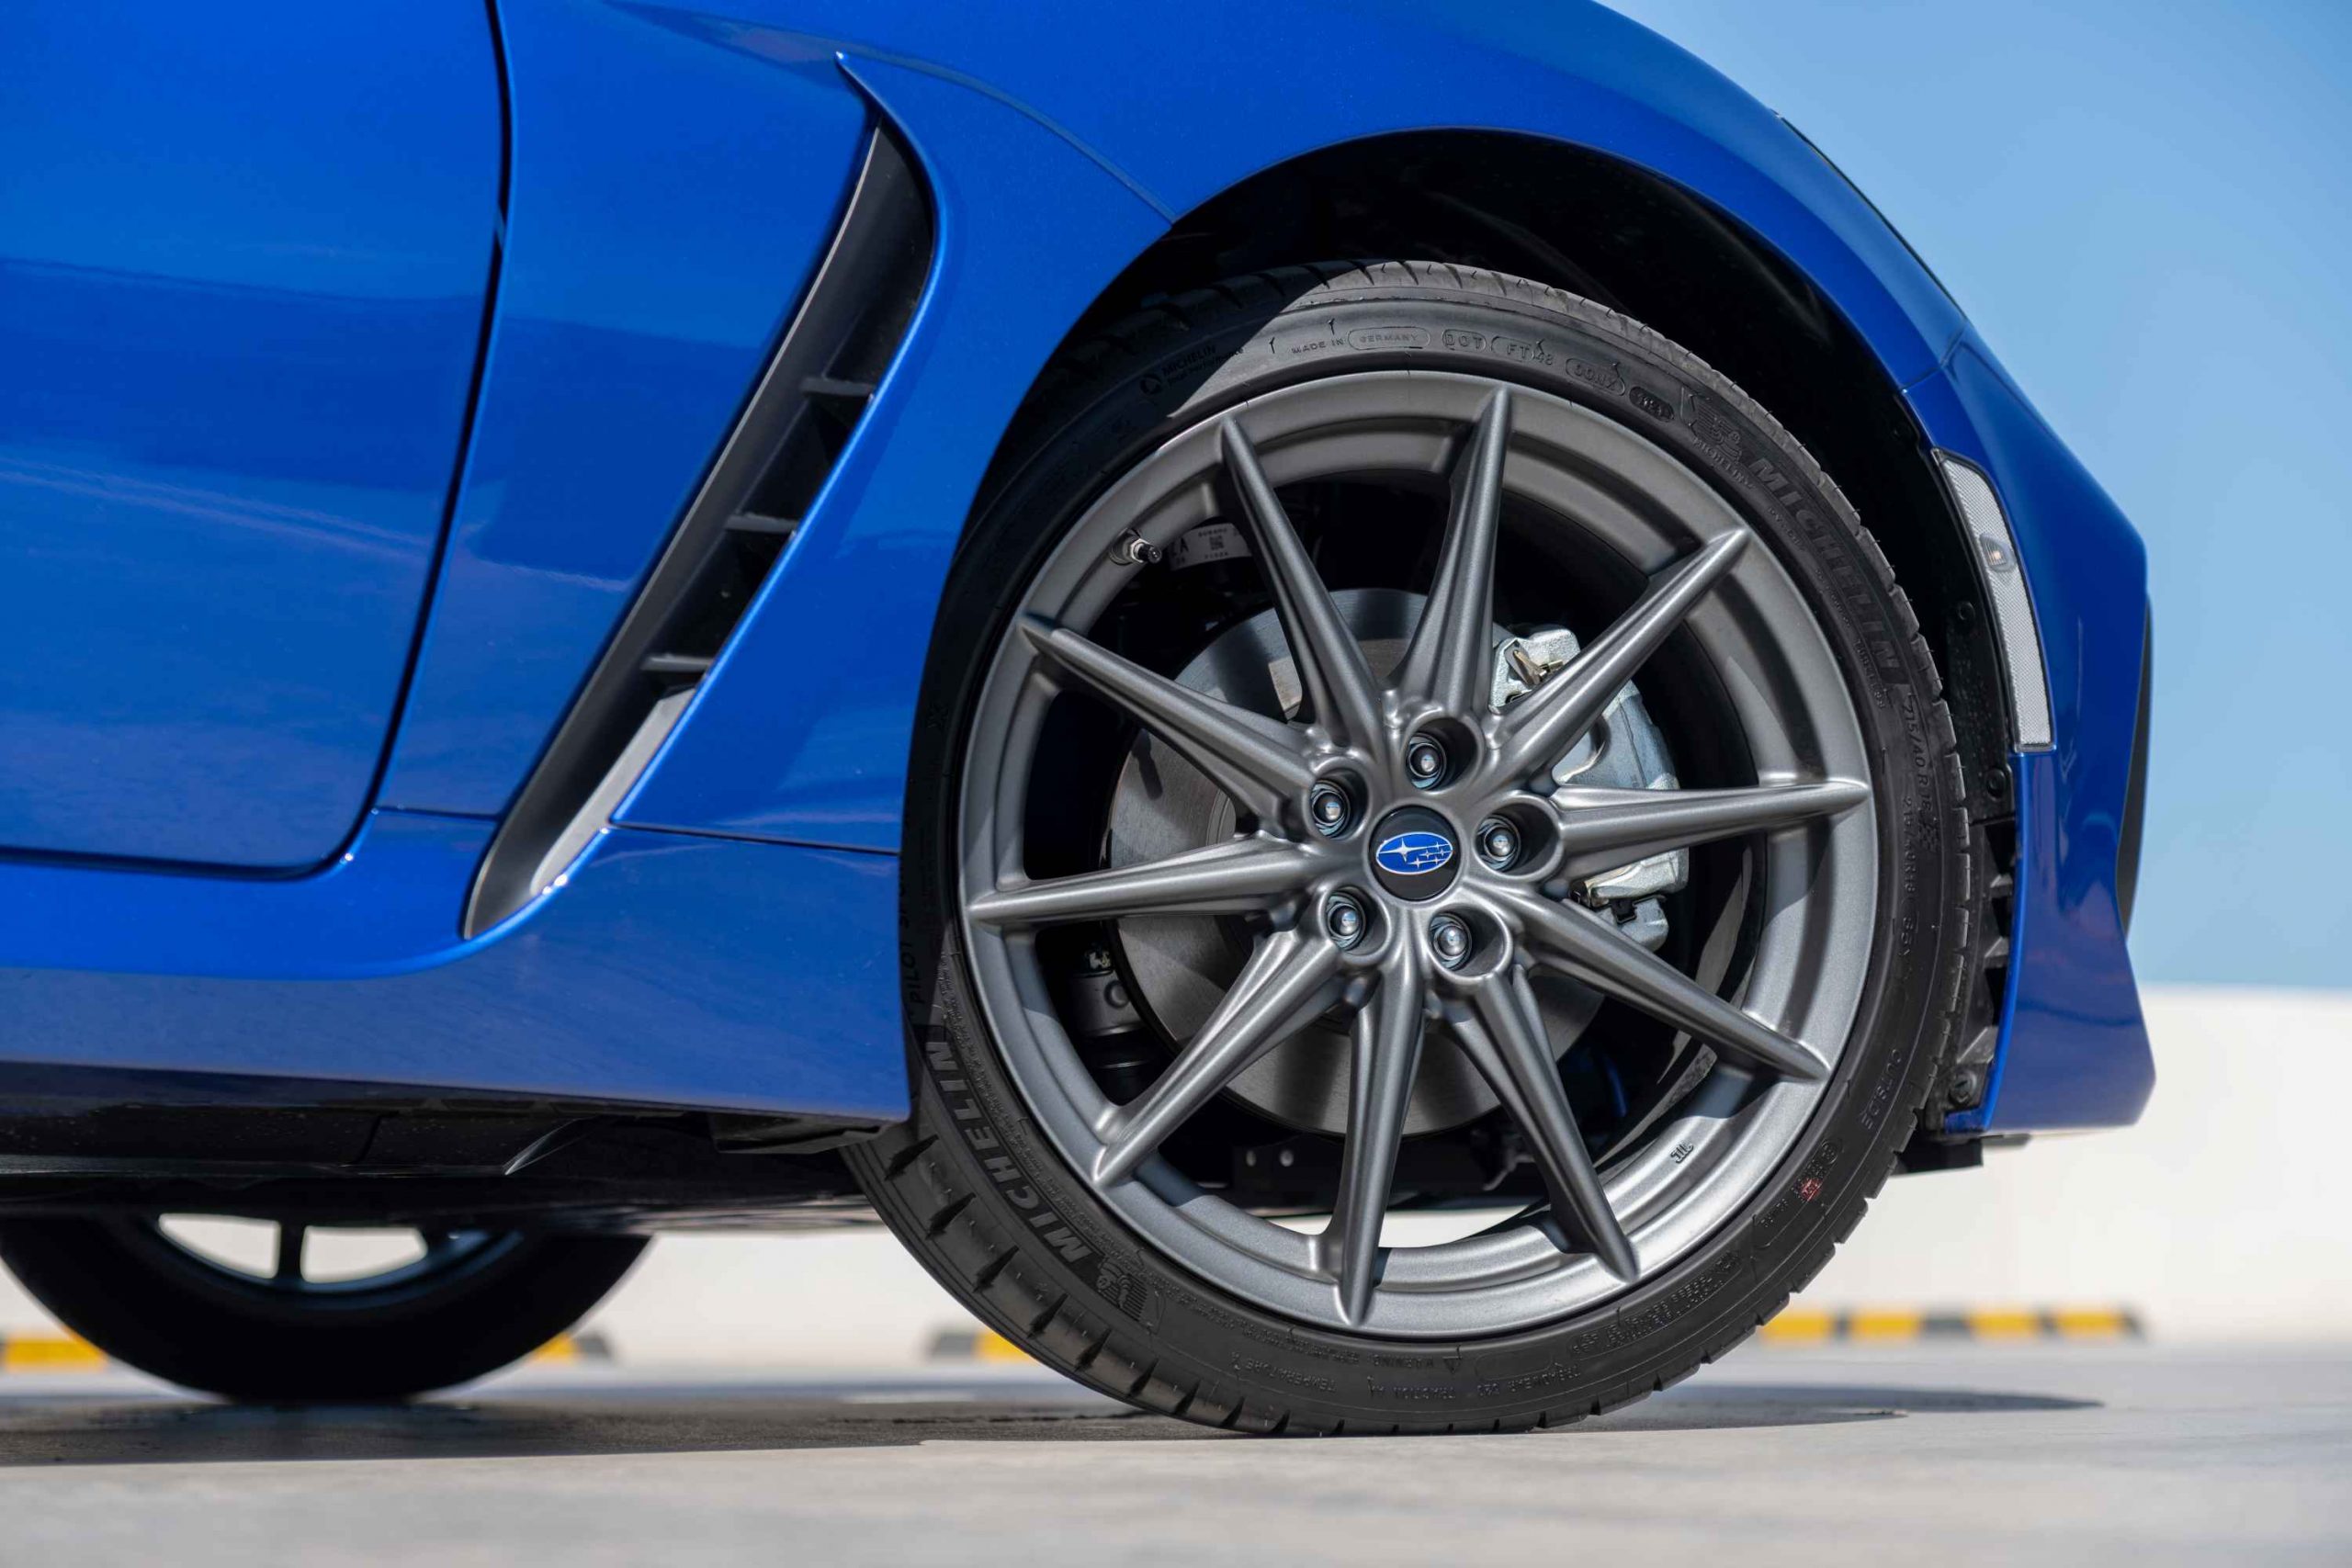 2022 Subaru BRZ Coupe S wheels and tyres